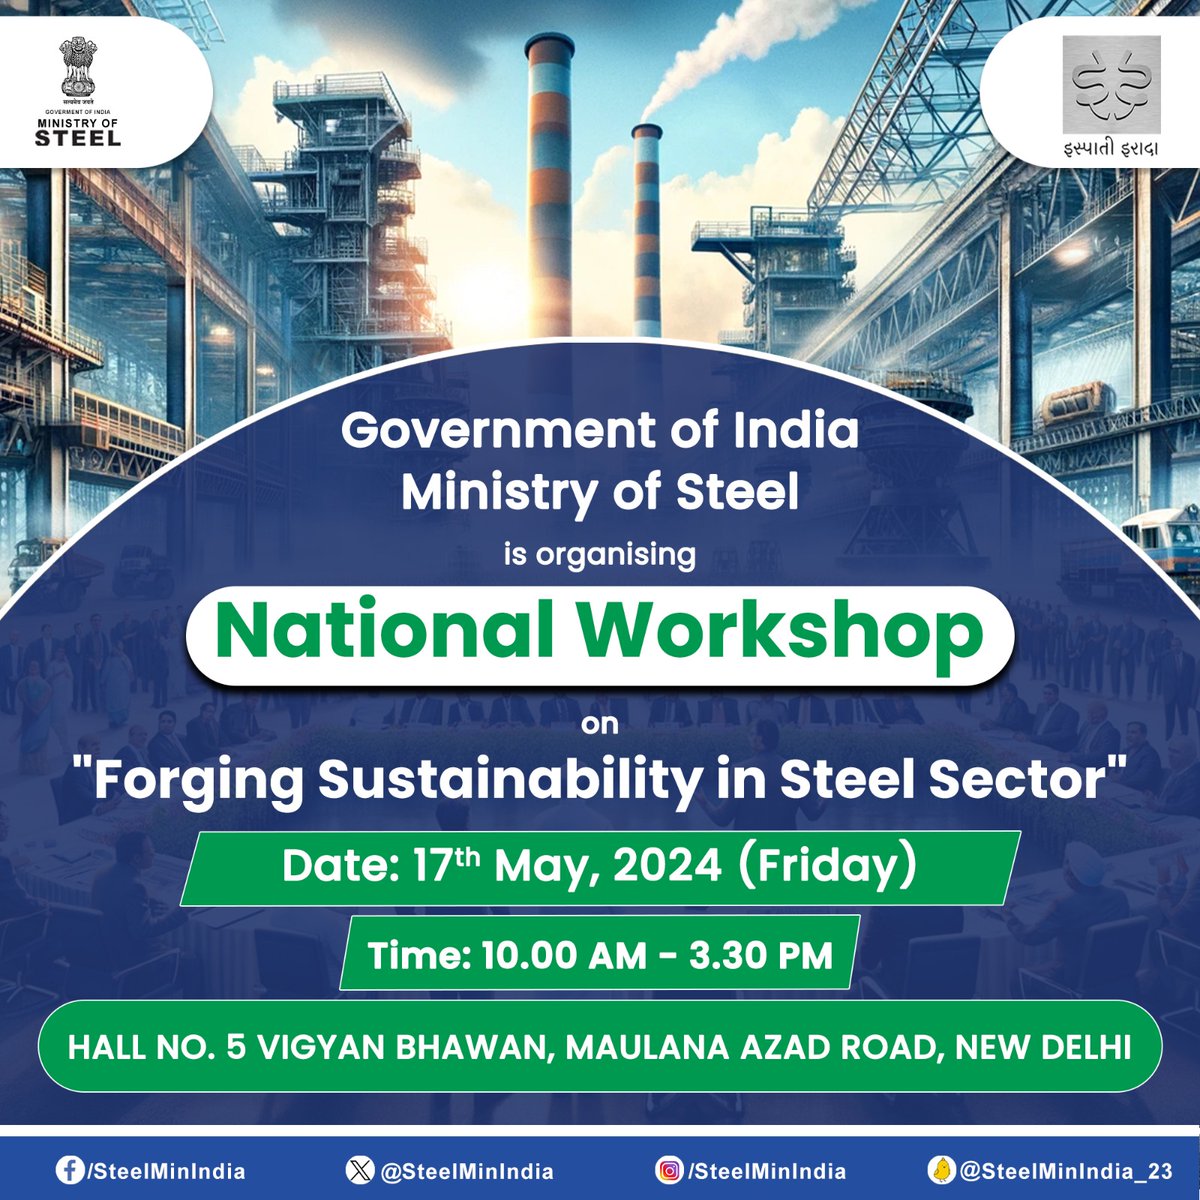 Join #MinistryofSteel's #Workshop on 'Forging Sustainability in the Steel Sector!'🛠️ 🗓️Date - 17th of May, 2024 📍Venue - Vigyan Bhawan, Delhi RSVP now to secure your spot by clicking on the link given:👇 forms.gle/QXgnT1CJ6RrQBs… View the agenda here:👇 steel.gov.in/sites/default/…